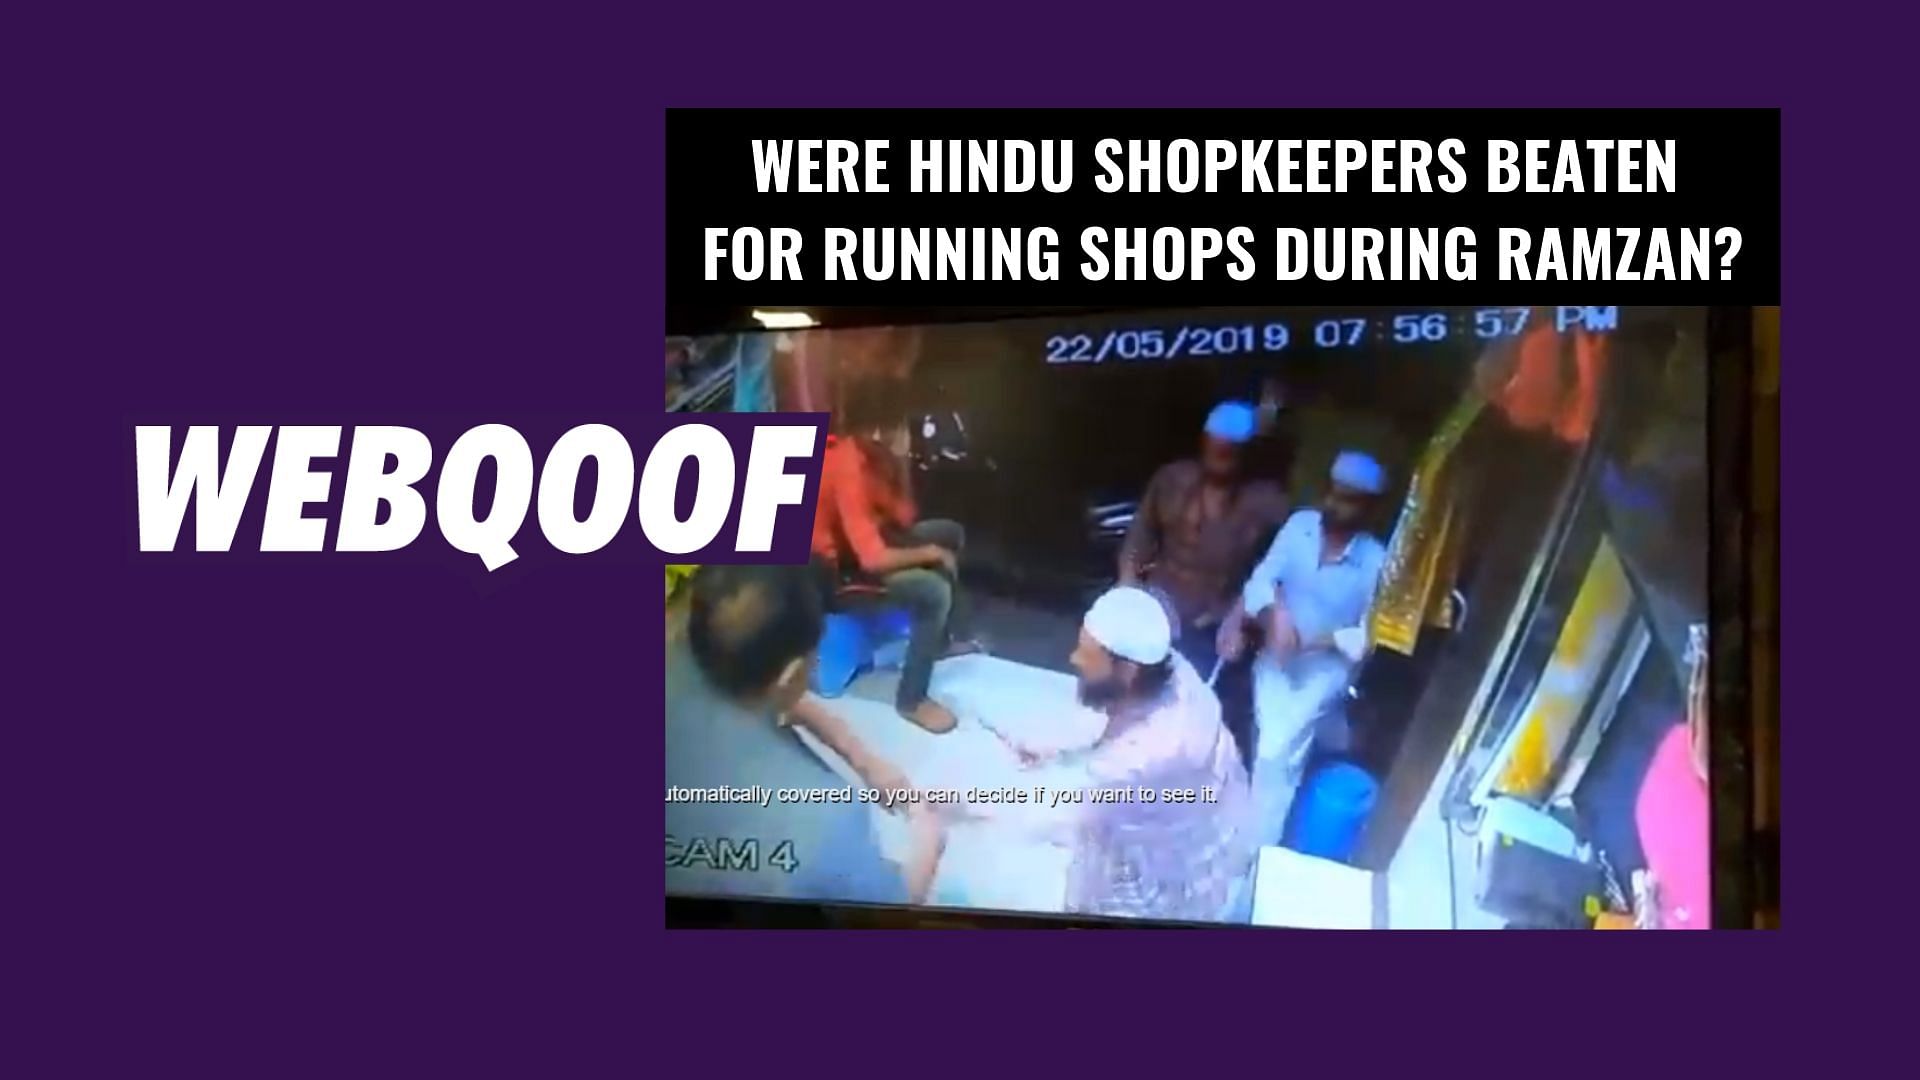 A video showing a group of Muslims beating up other men inside a shop has gone viral on social media.